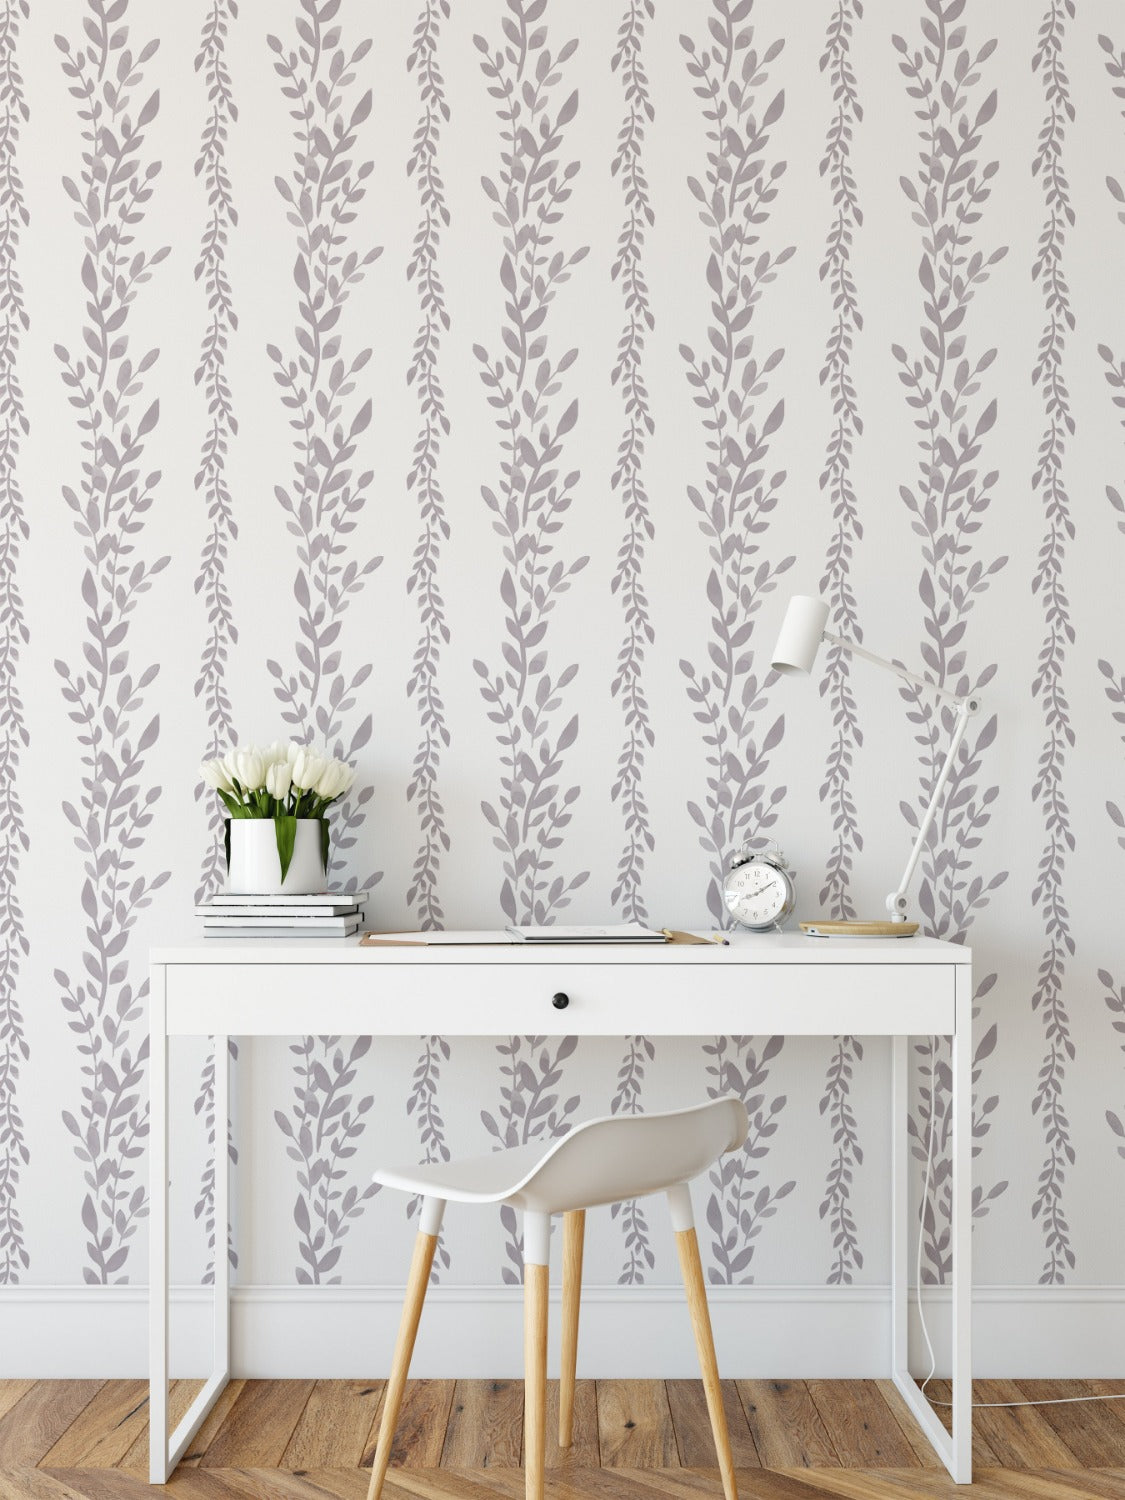 Elegant office setting with Classic Floral Wallpaper featuring vertical rows of soft gray floral patterns on a white background, creating a sophisticated and calming ambiance